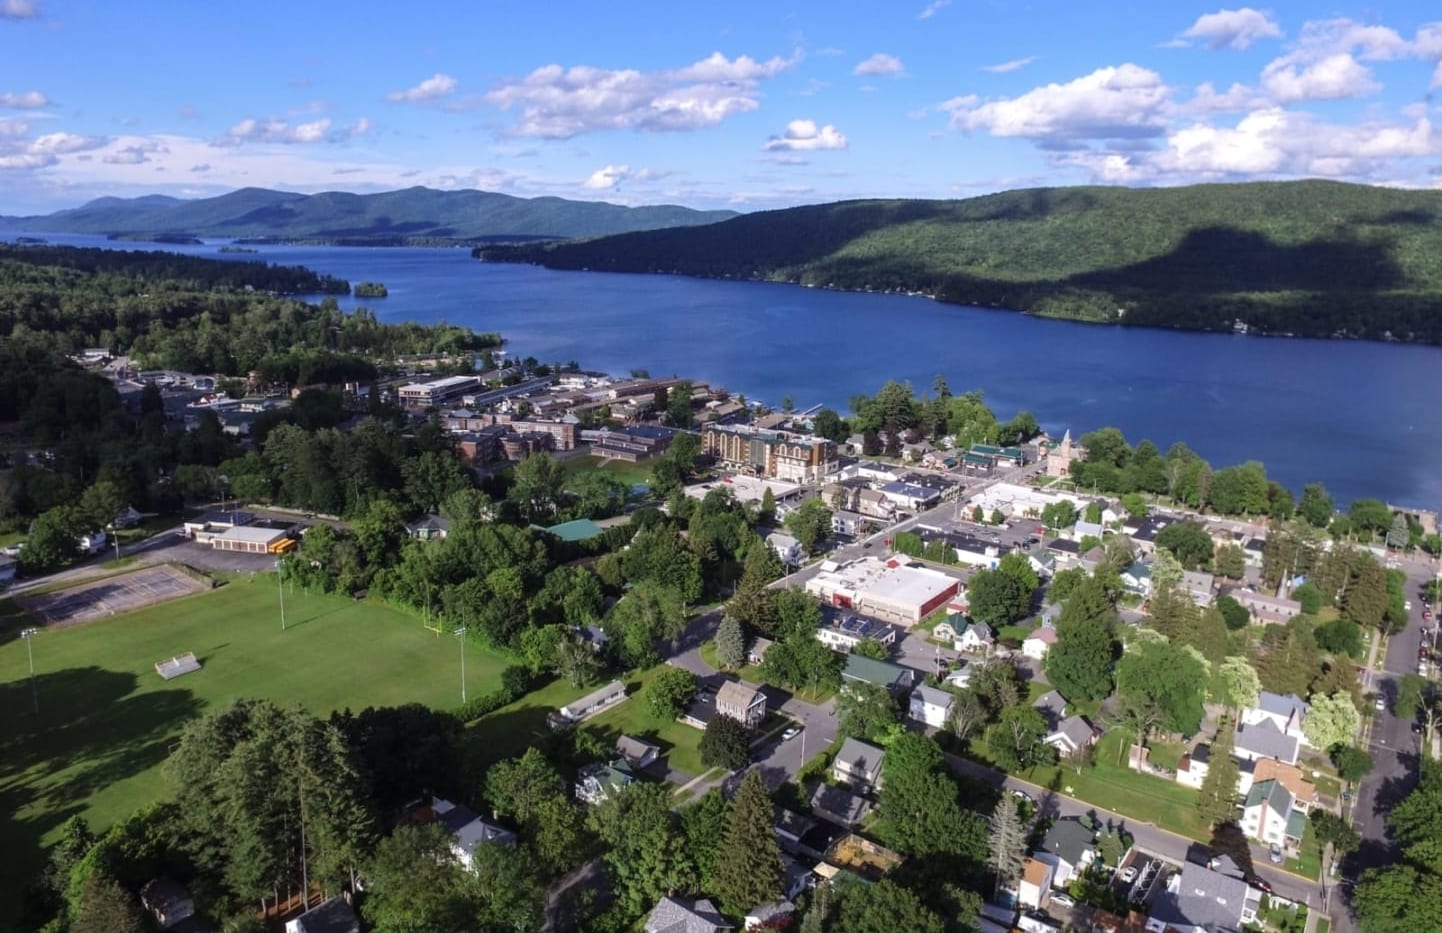 Lake George, New York on a sunny day.